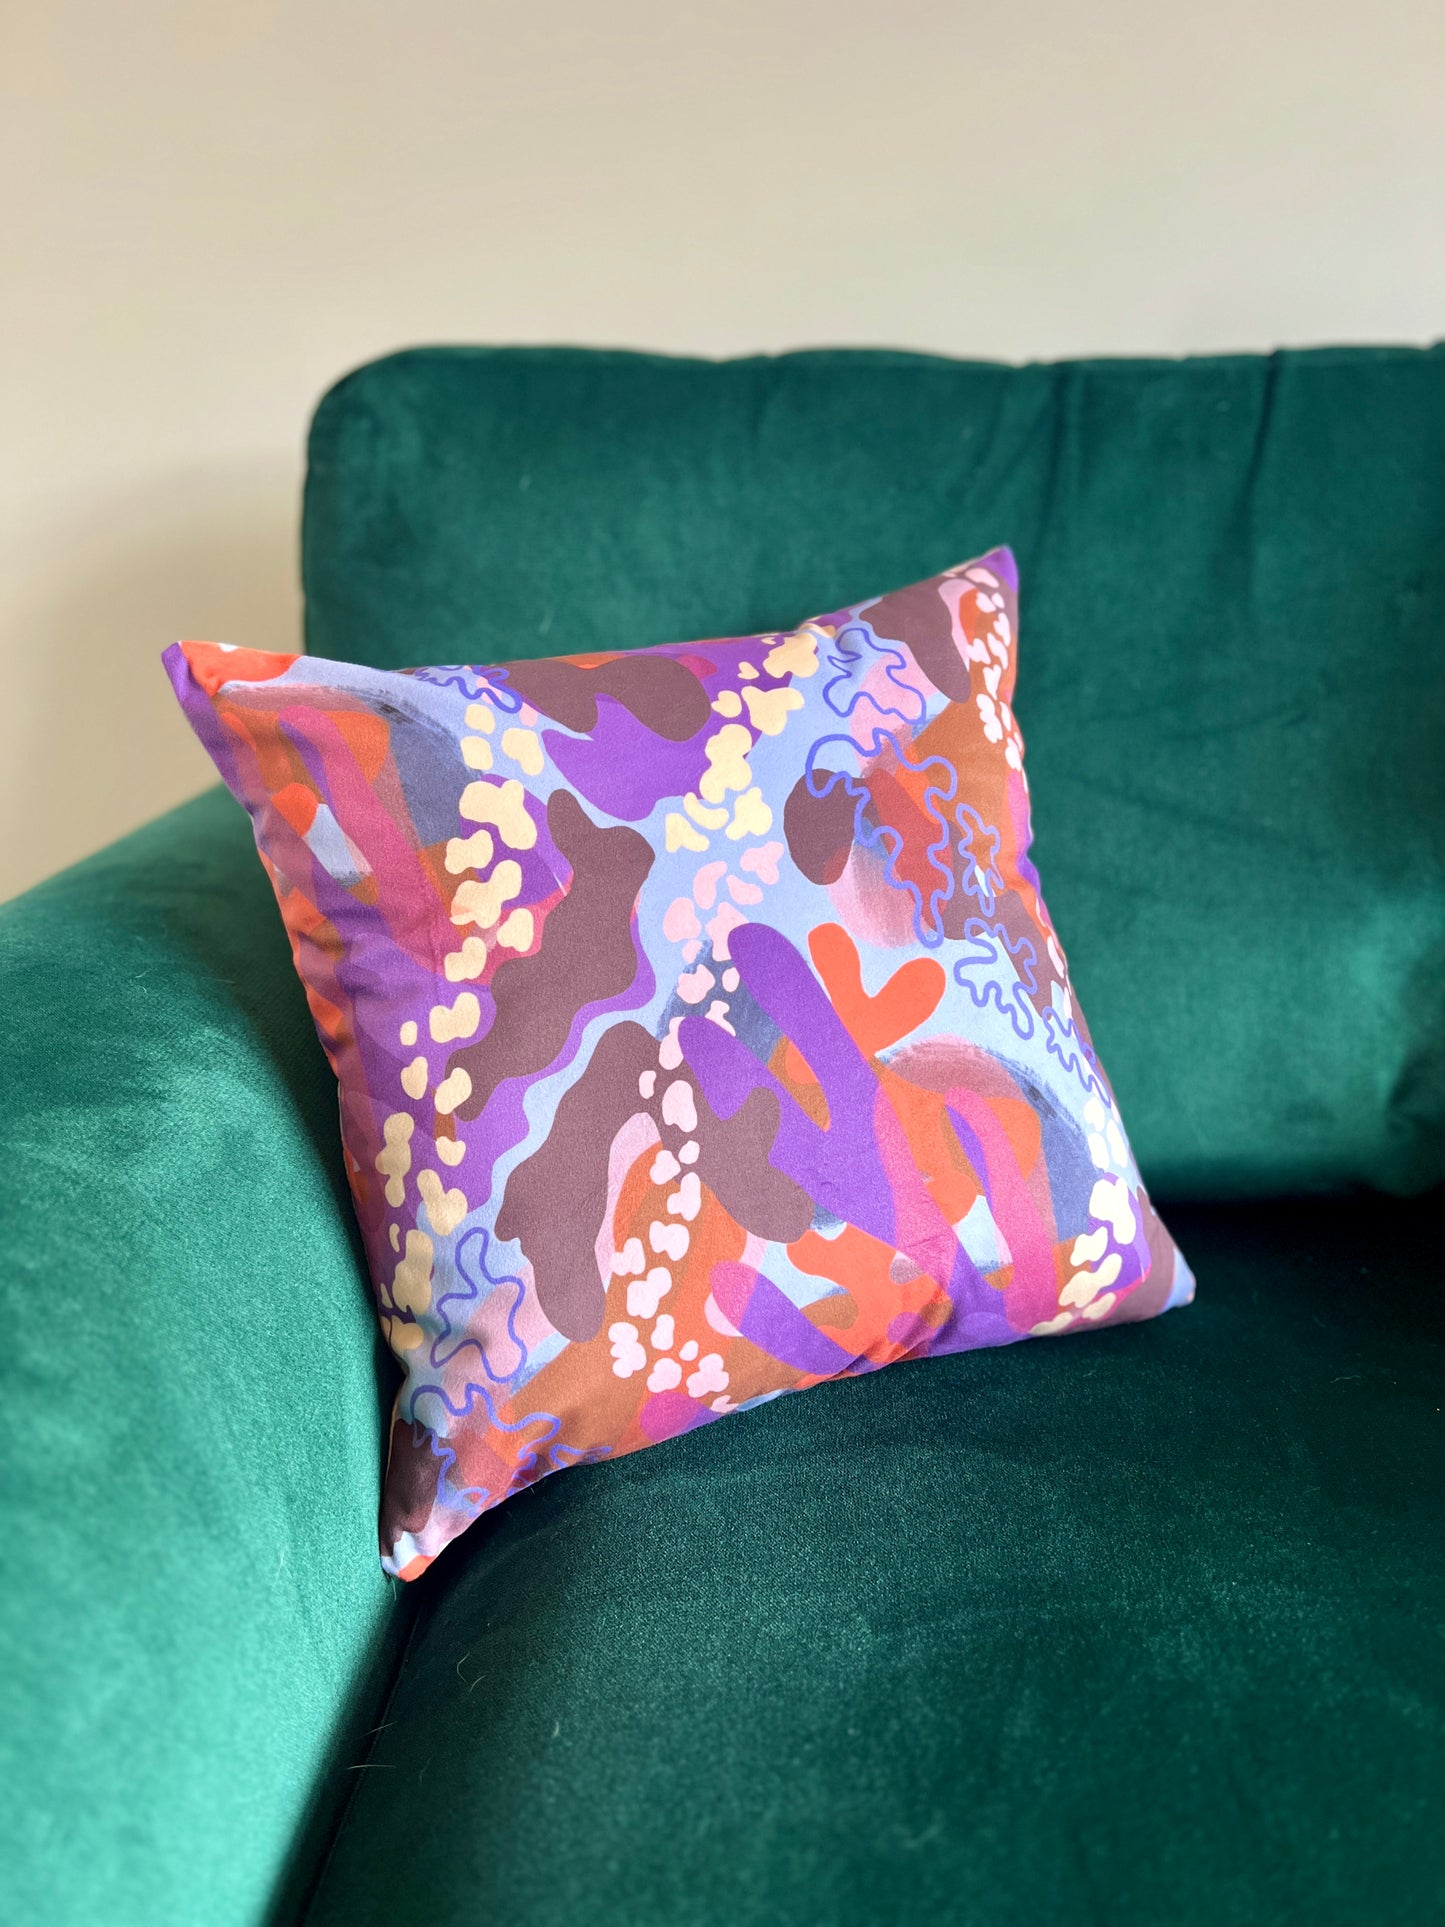 An abstract statement cushion placed on a deep green sofa. The cushion is made up of shapes of purple, orange and pink.